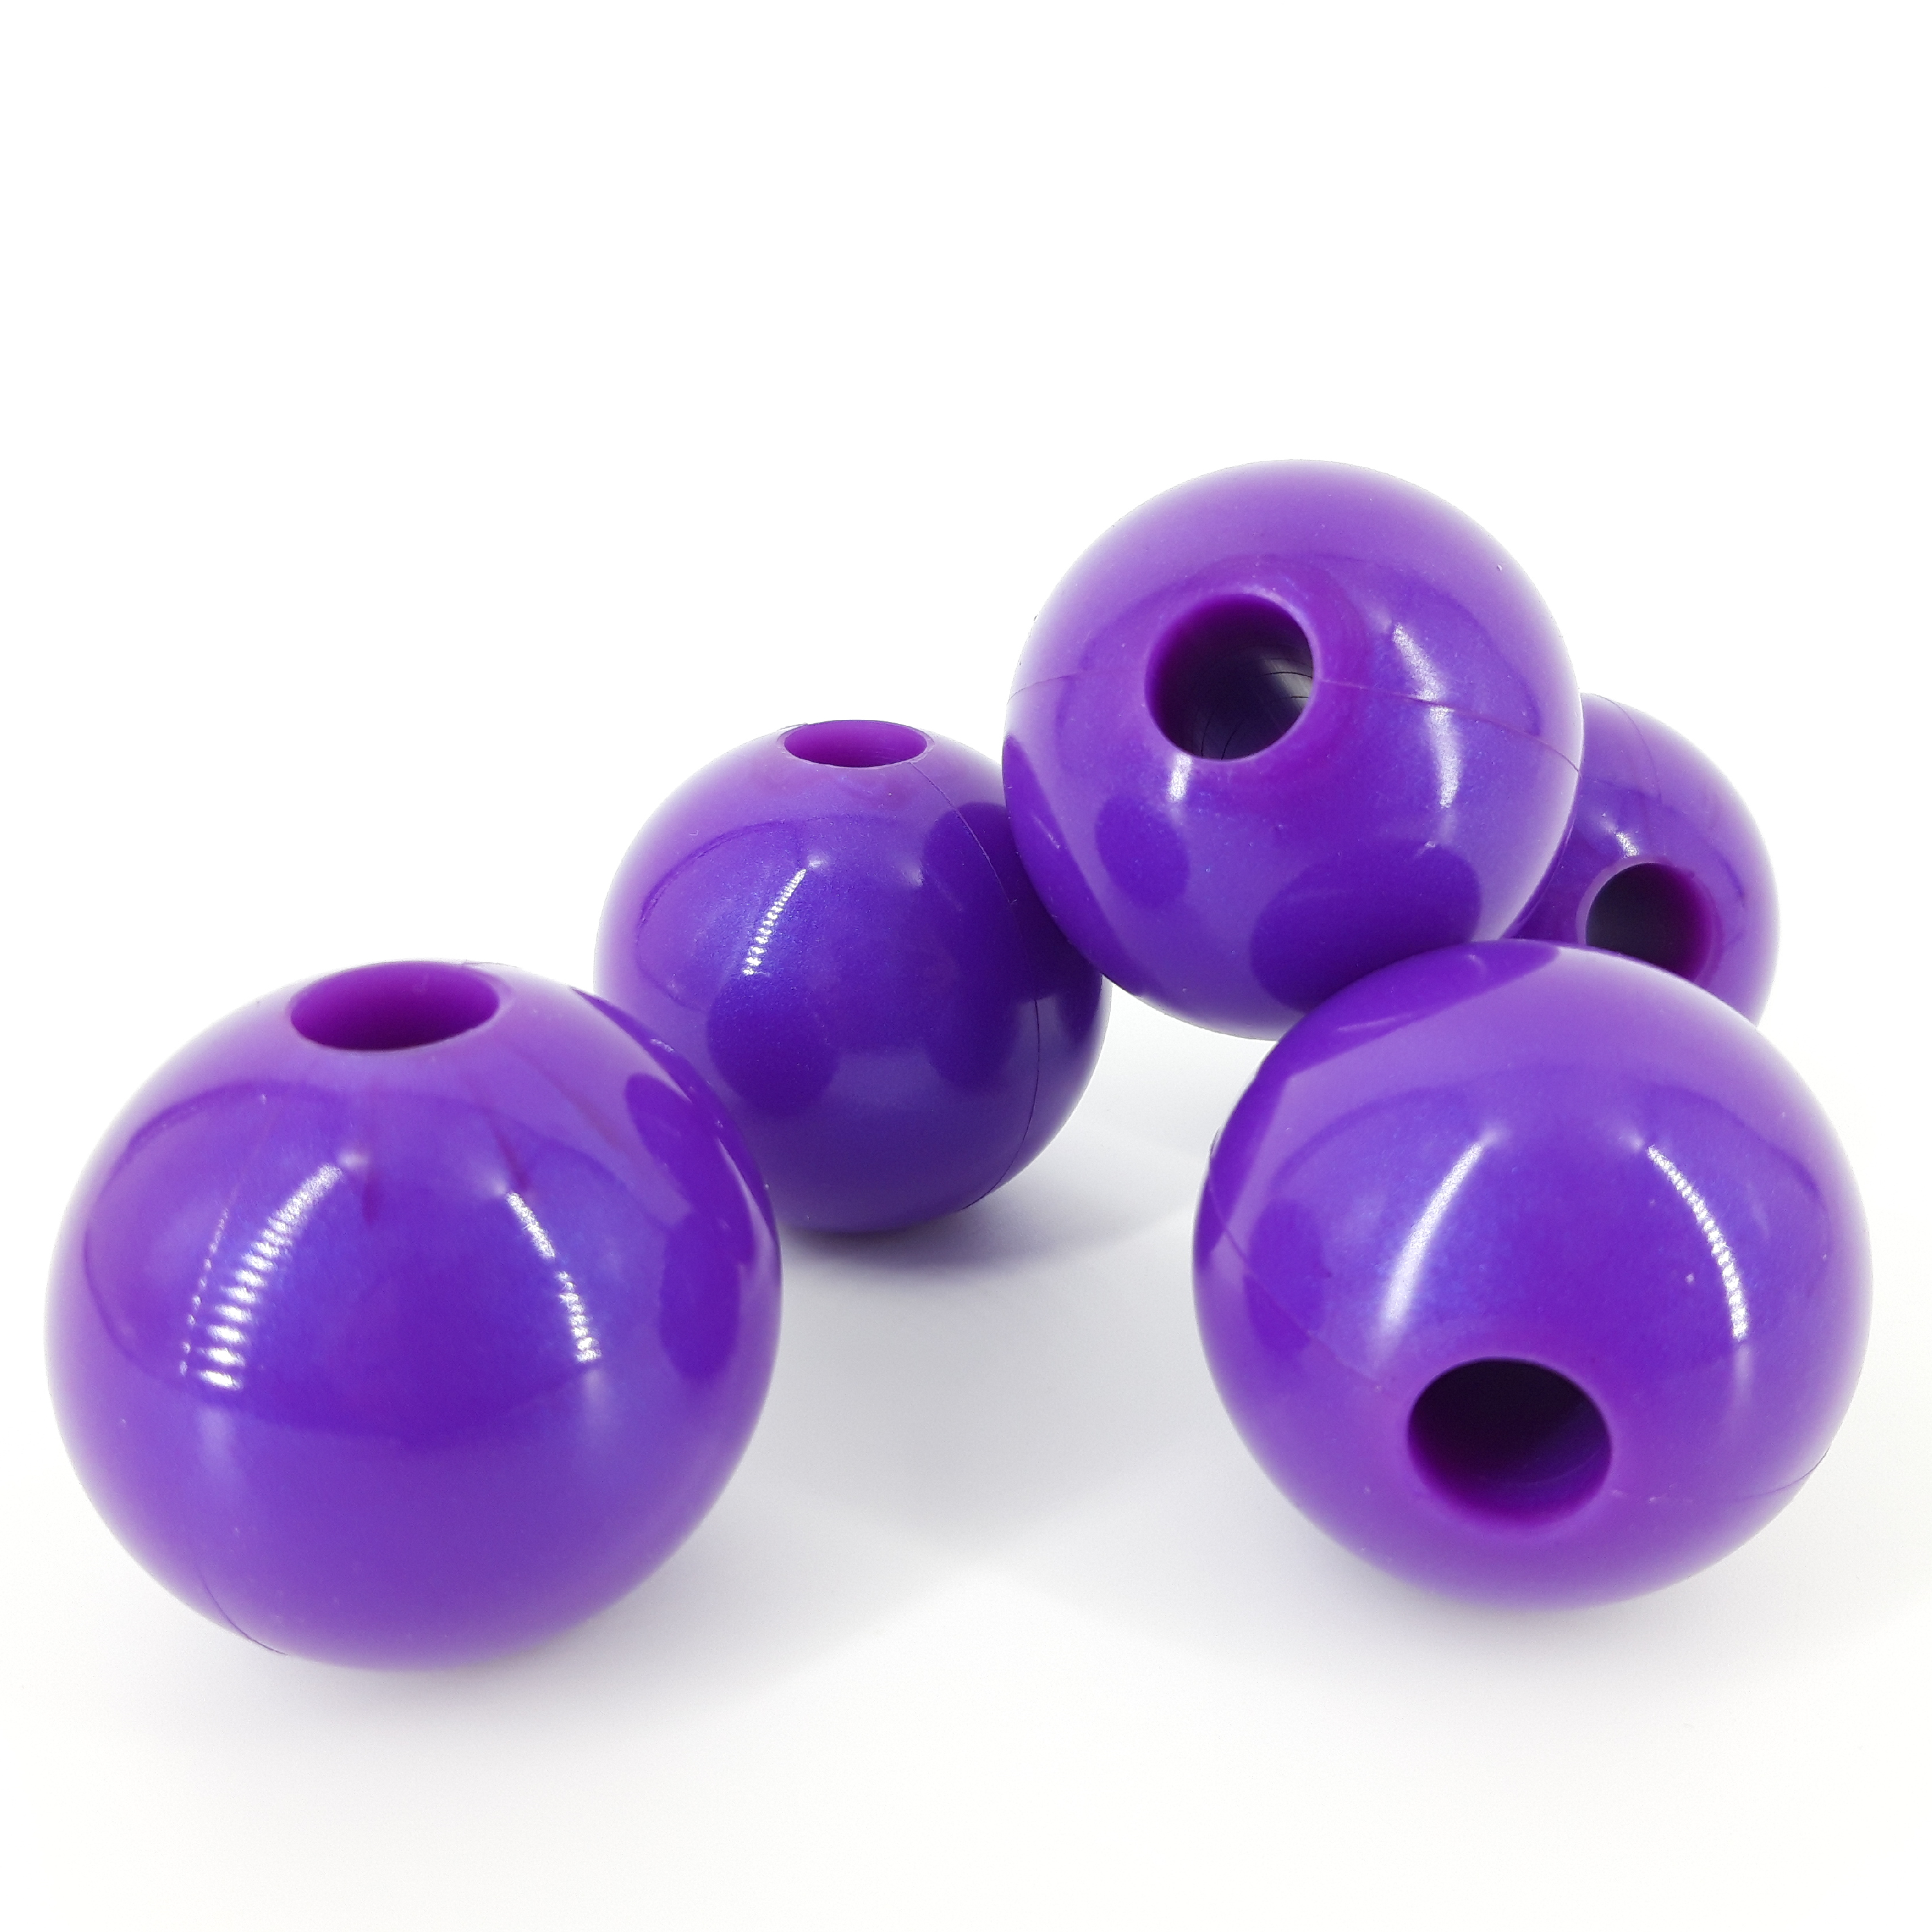 06) purple with a blue tinge, 45 mm, squishy